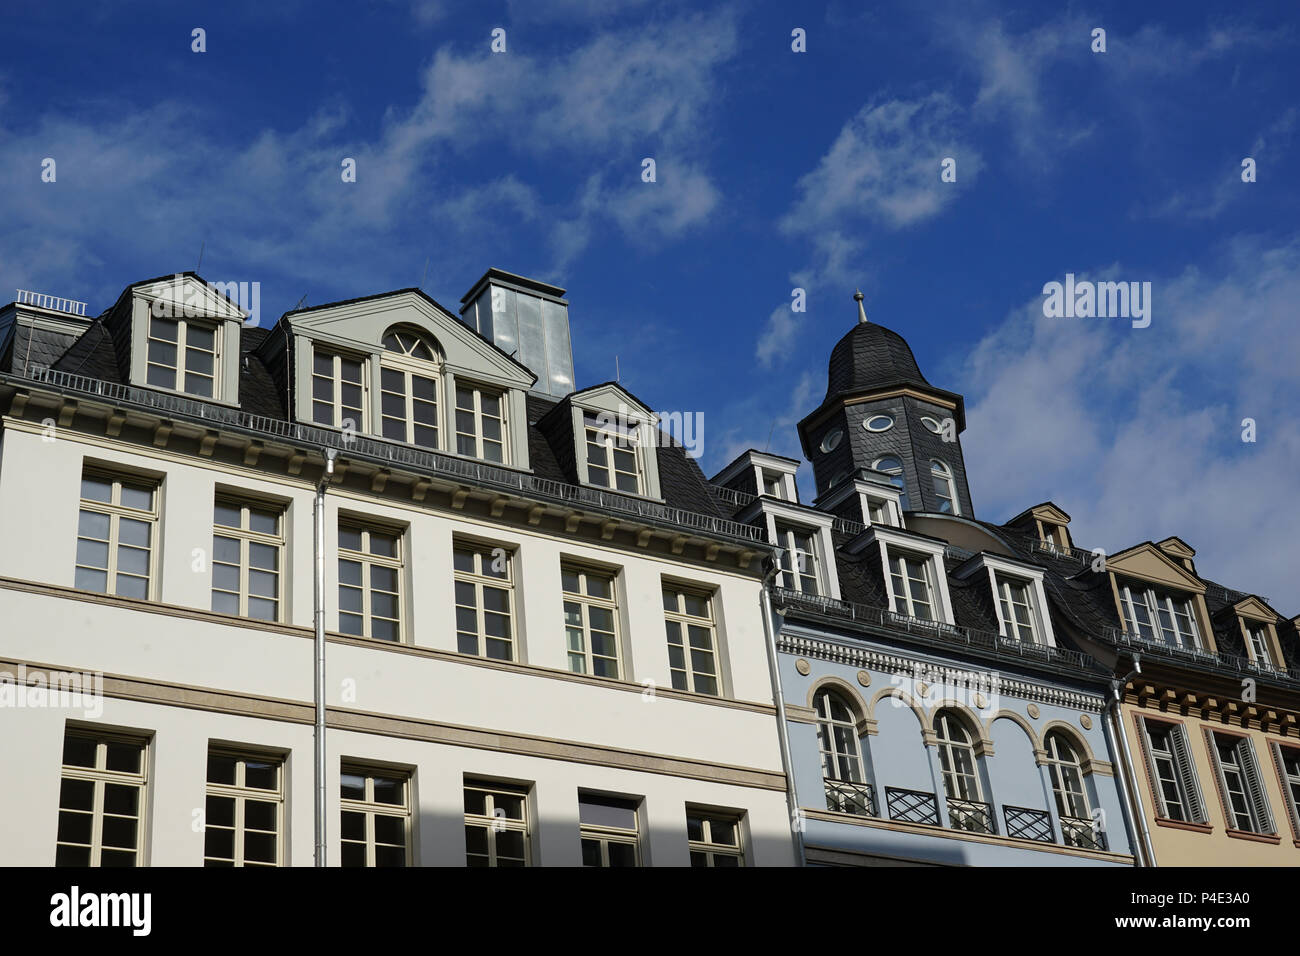 Facades, New Old Town, Dom-Roemer Project, Old Town, Historic Center, Frankfurt am Main, Hesse, Germany Stock Photo